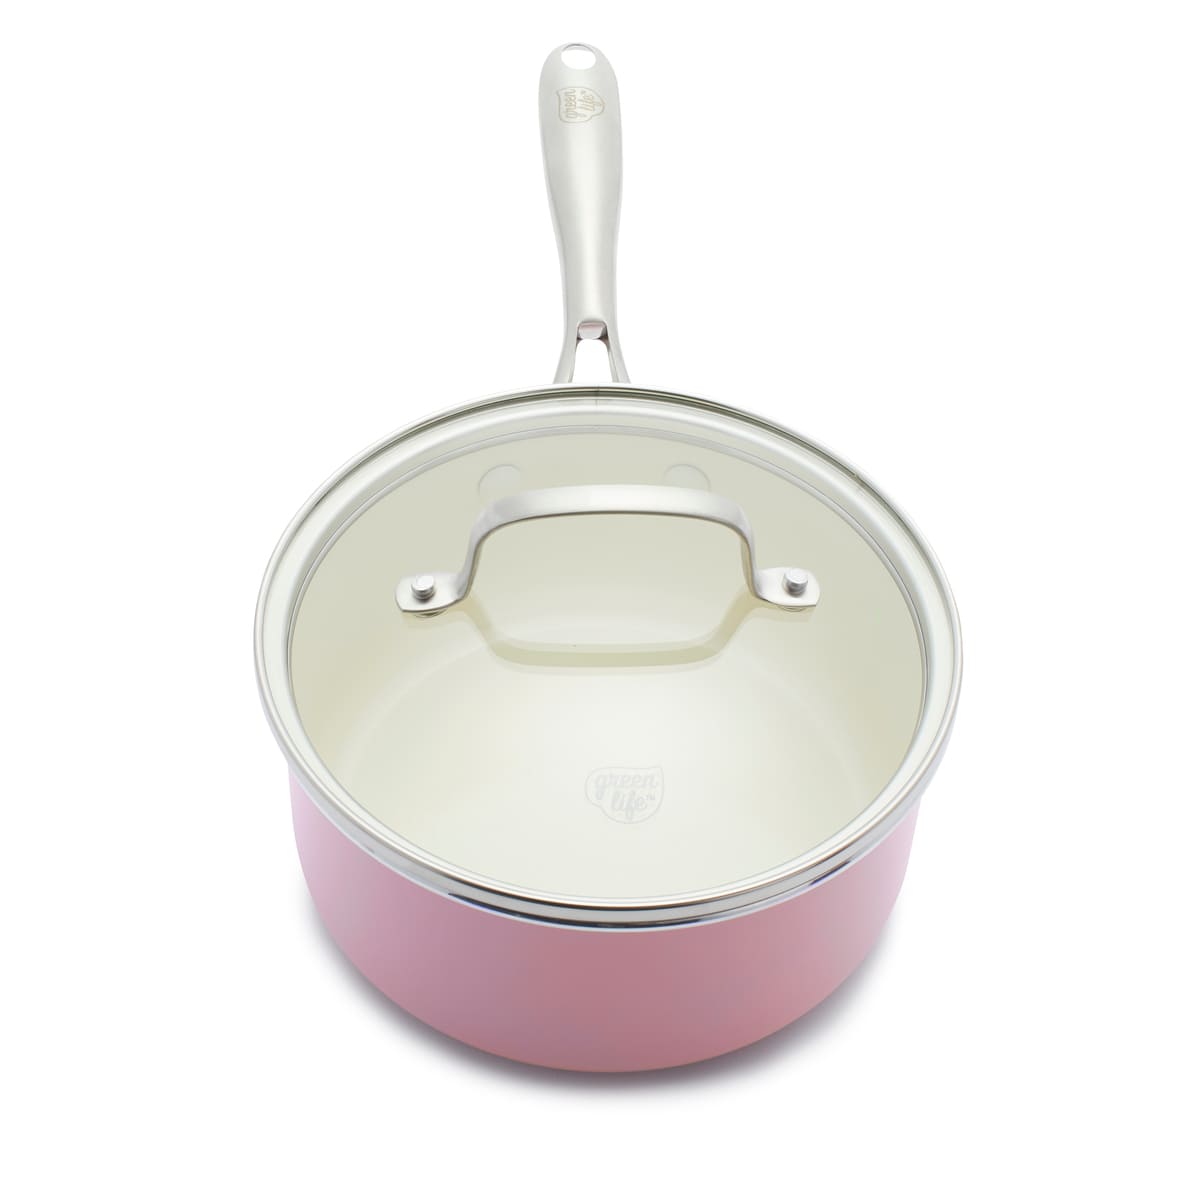 CC004708-001 - Porpoise GREENLIFE ARTISAN 4PC COOKWARE SETS, PINK - 15 & 18CM - Product Image 4